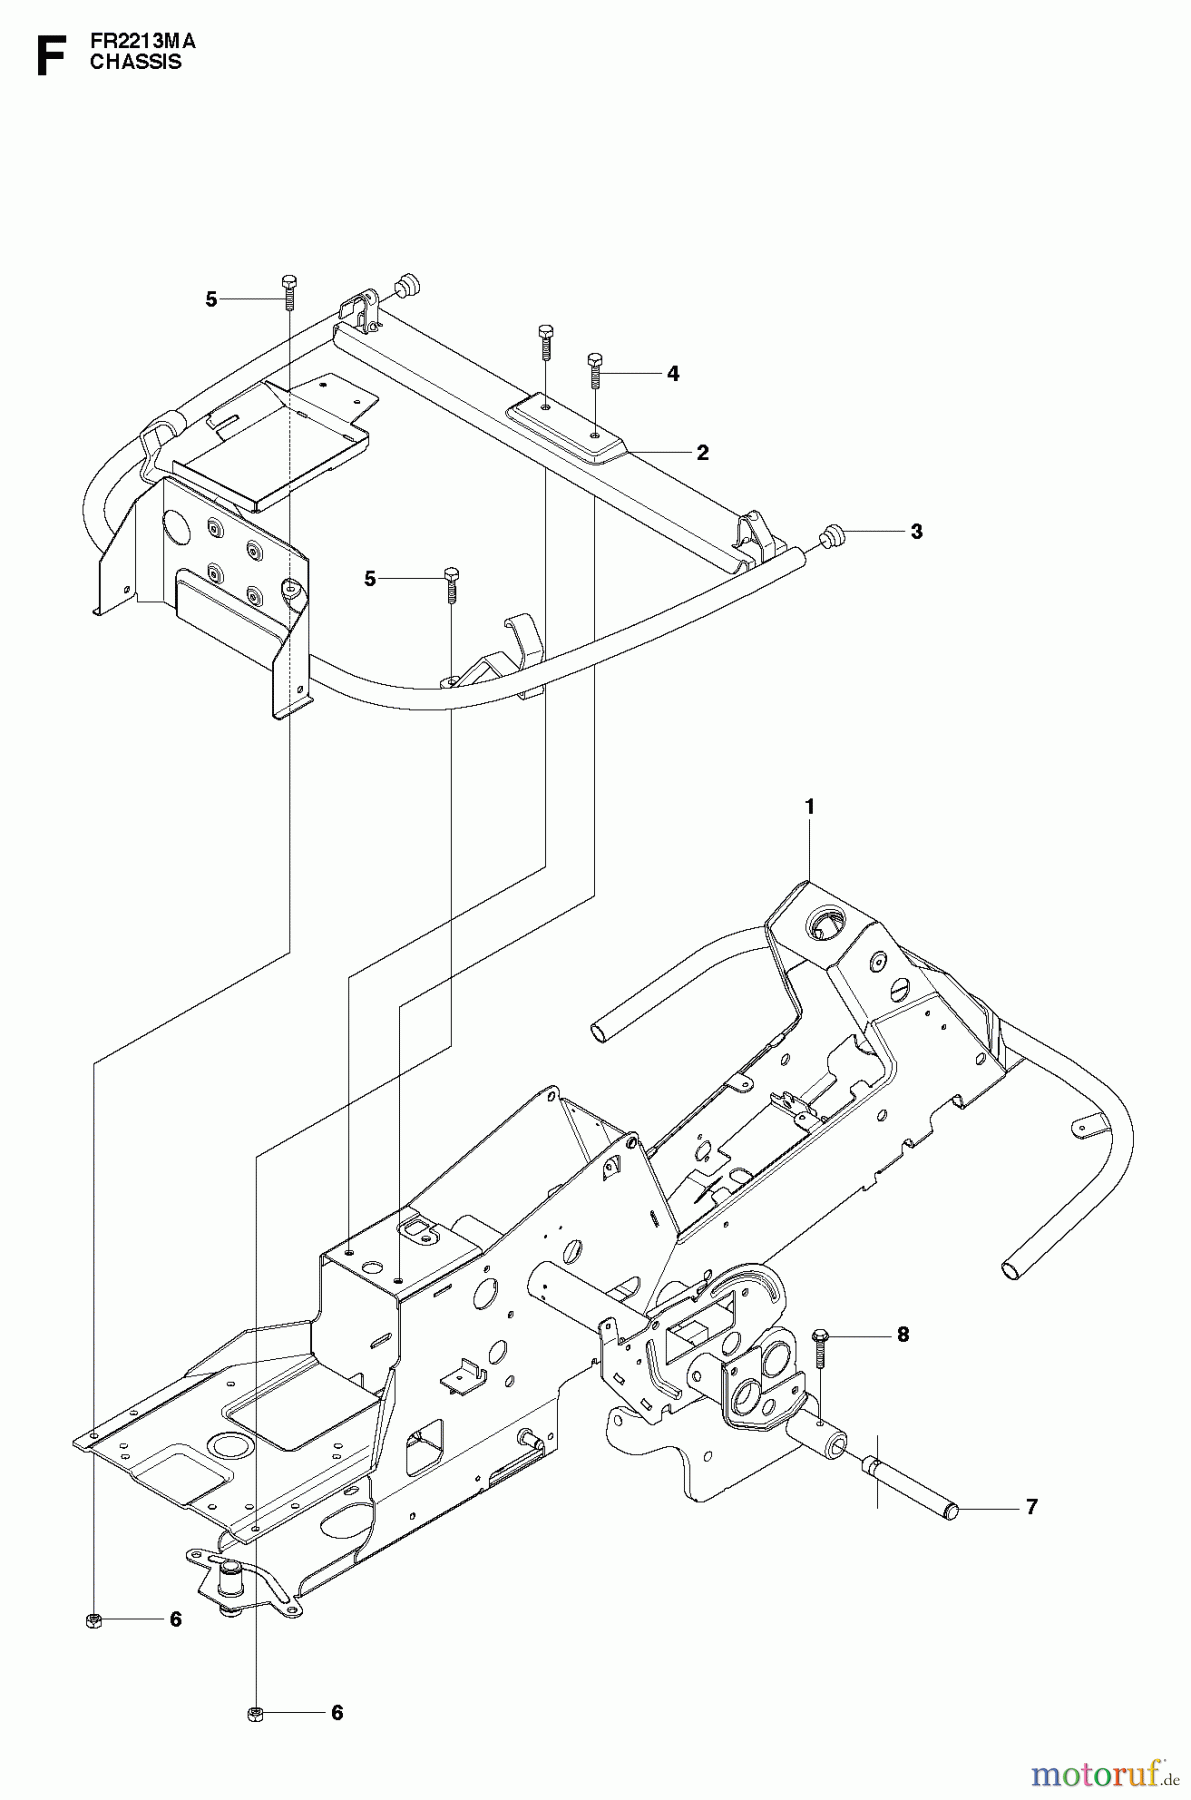  Jonsered Reitermäher FR2213 MA (965190301) - Jonsered Rear-Engine Riding Mower (2010-07) CHASSIS ENCLOSURES